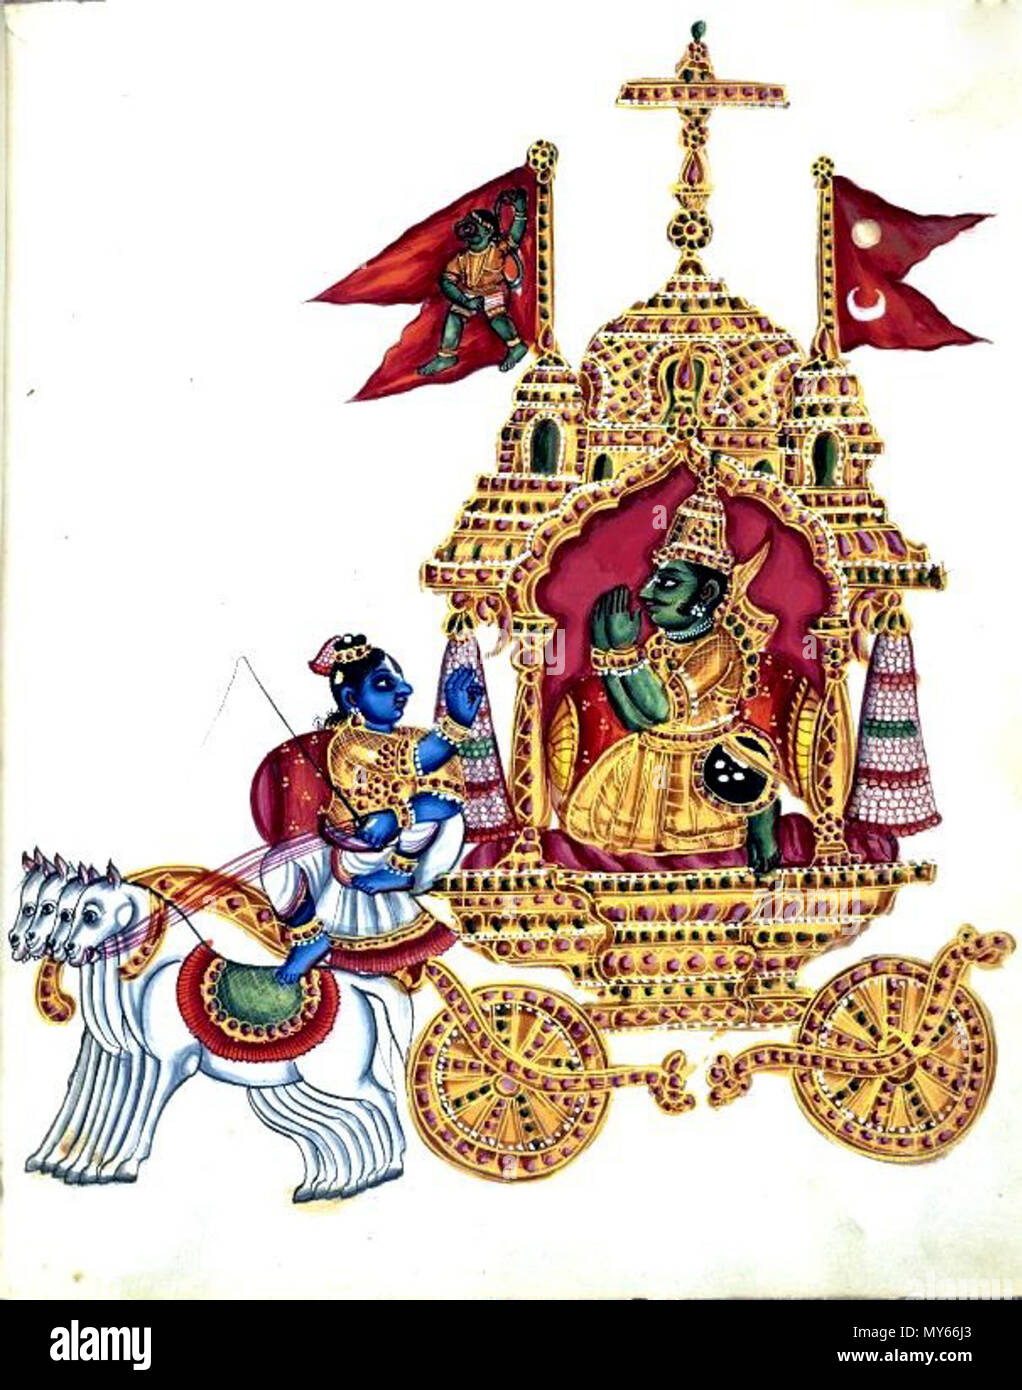 . English: 'Gouache painting on paper, part of an album of seventy paintings of Indian deities. Arjuna, dressed in courtly costume with a quiver slung over his shoulder and sword and buckler at his side, folds his hands in anjali mudra and kneels before his charioteer, Kṛṣṇa. The god sits holding the horses’ bridles, with his right hand raised in the teaching gesture, jnana mudra. Their conveyance is drawn by four horses, and its roof is surmounted by a chhattra. At its sides are two flags – one with the standard bearing Arjuna’s emblem, the Hanuman flag and the Flag of Nepal . circa 1830. Unk Stock Photo